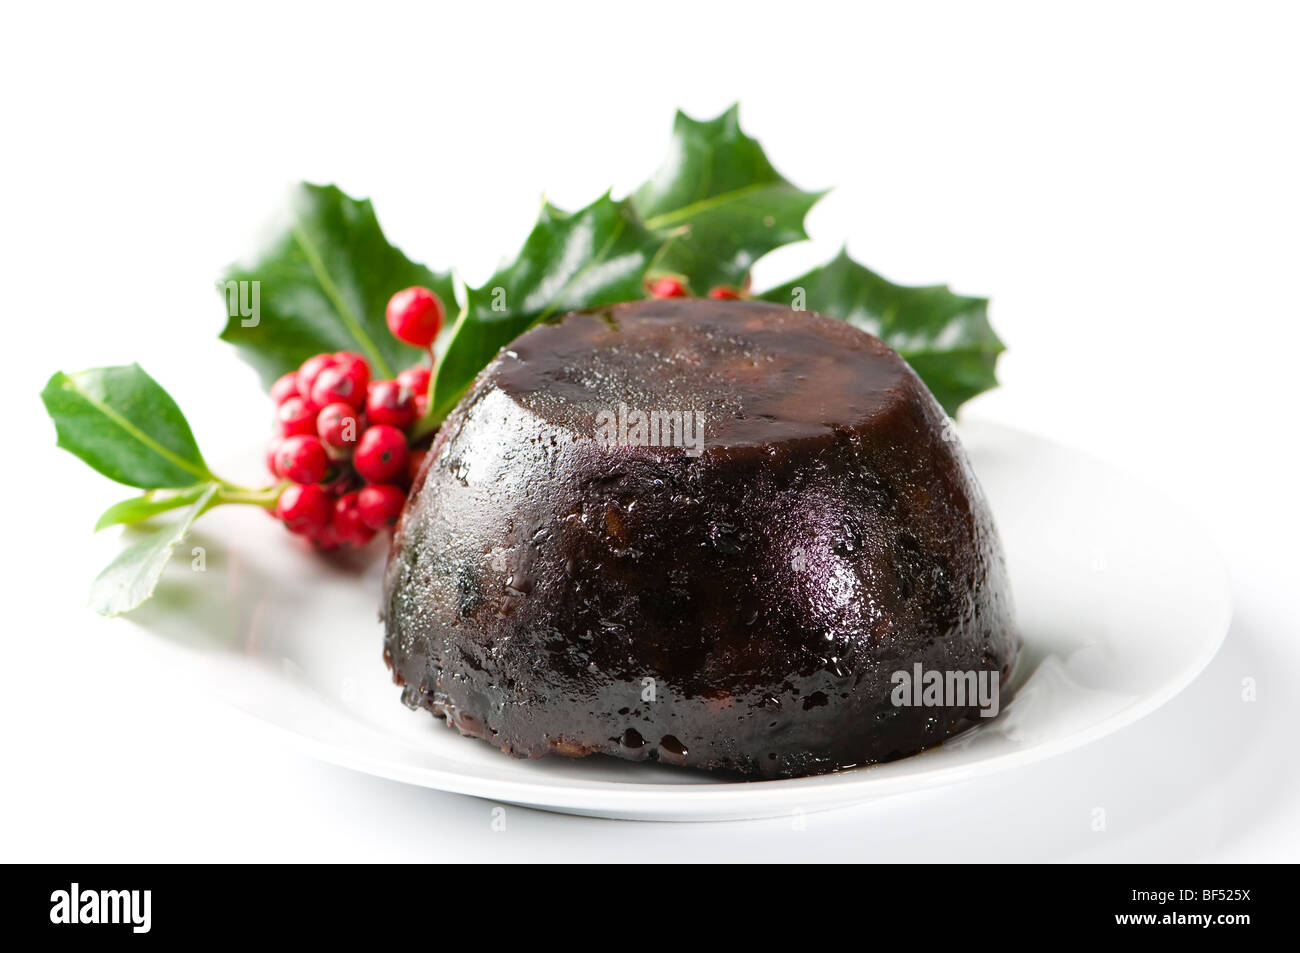 Simple Christmas pudding on white plate and background with holly decoration Stock Photo